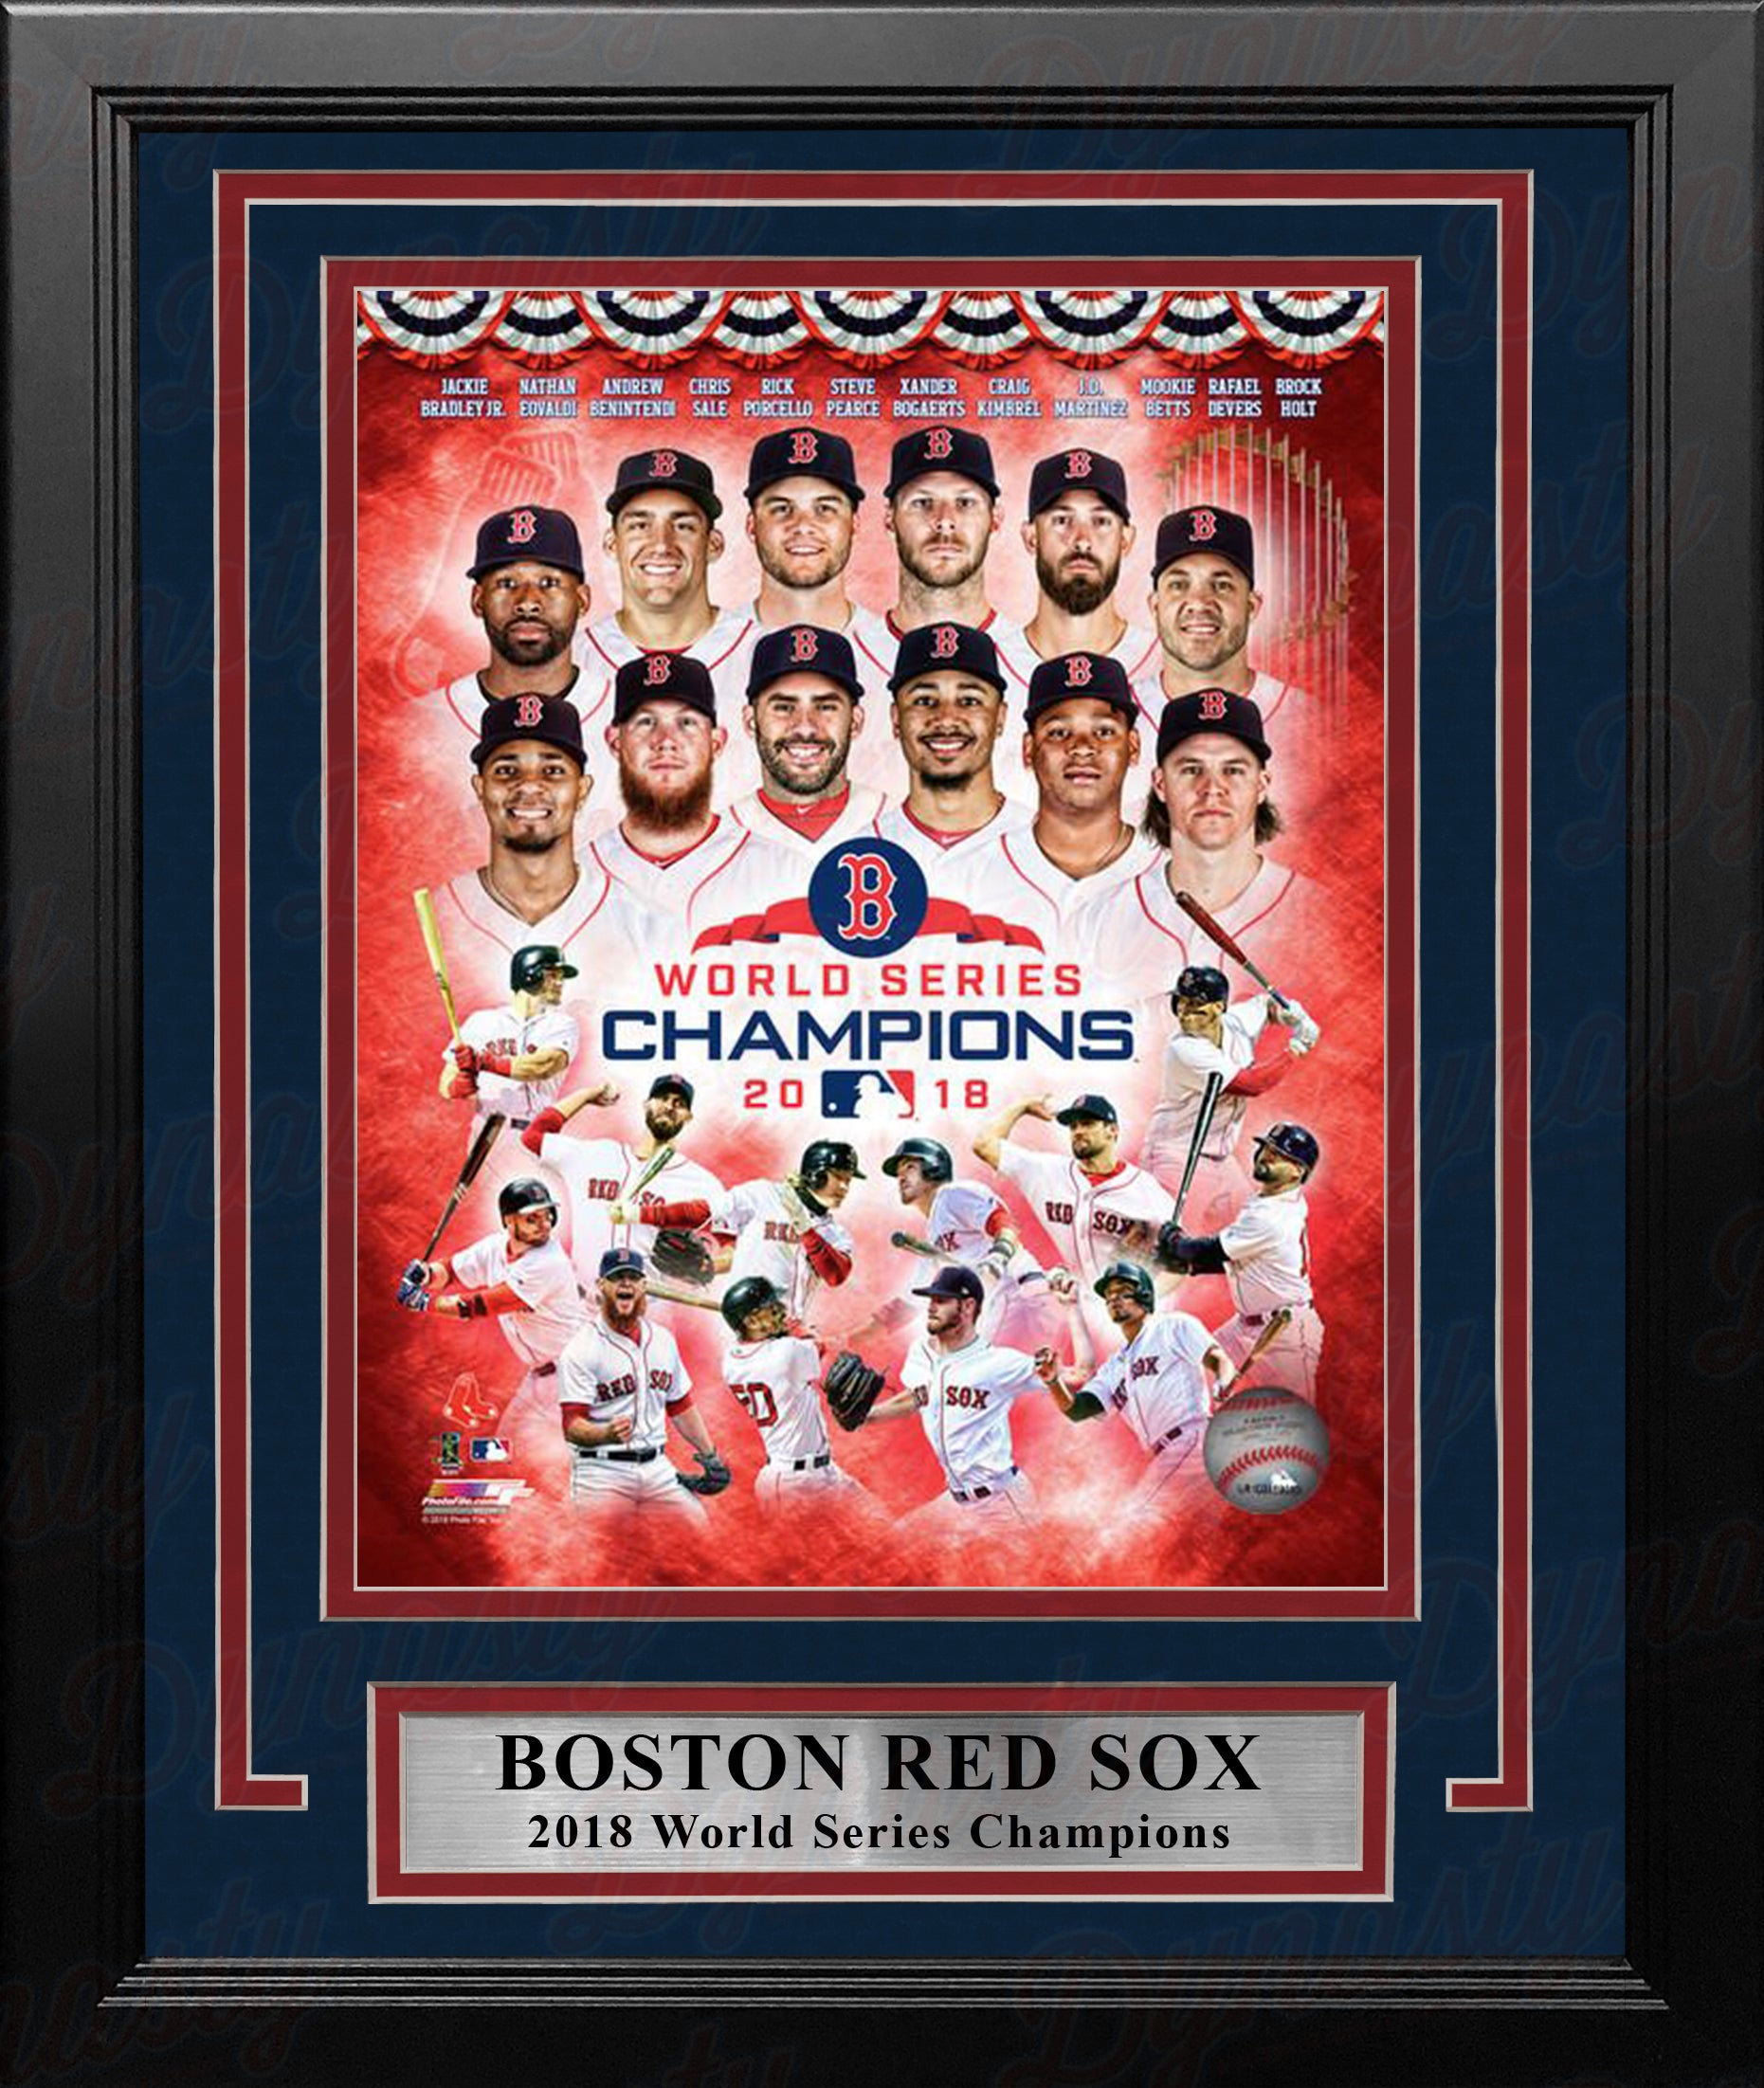 The Boston Red Sox Are World Series Champs